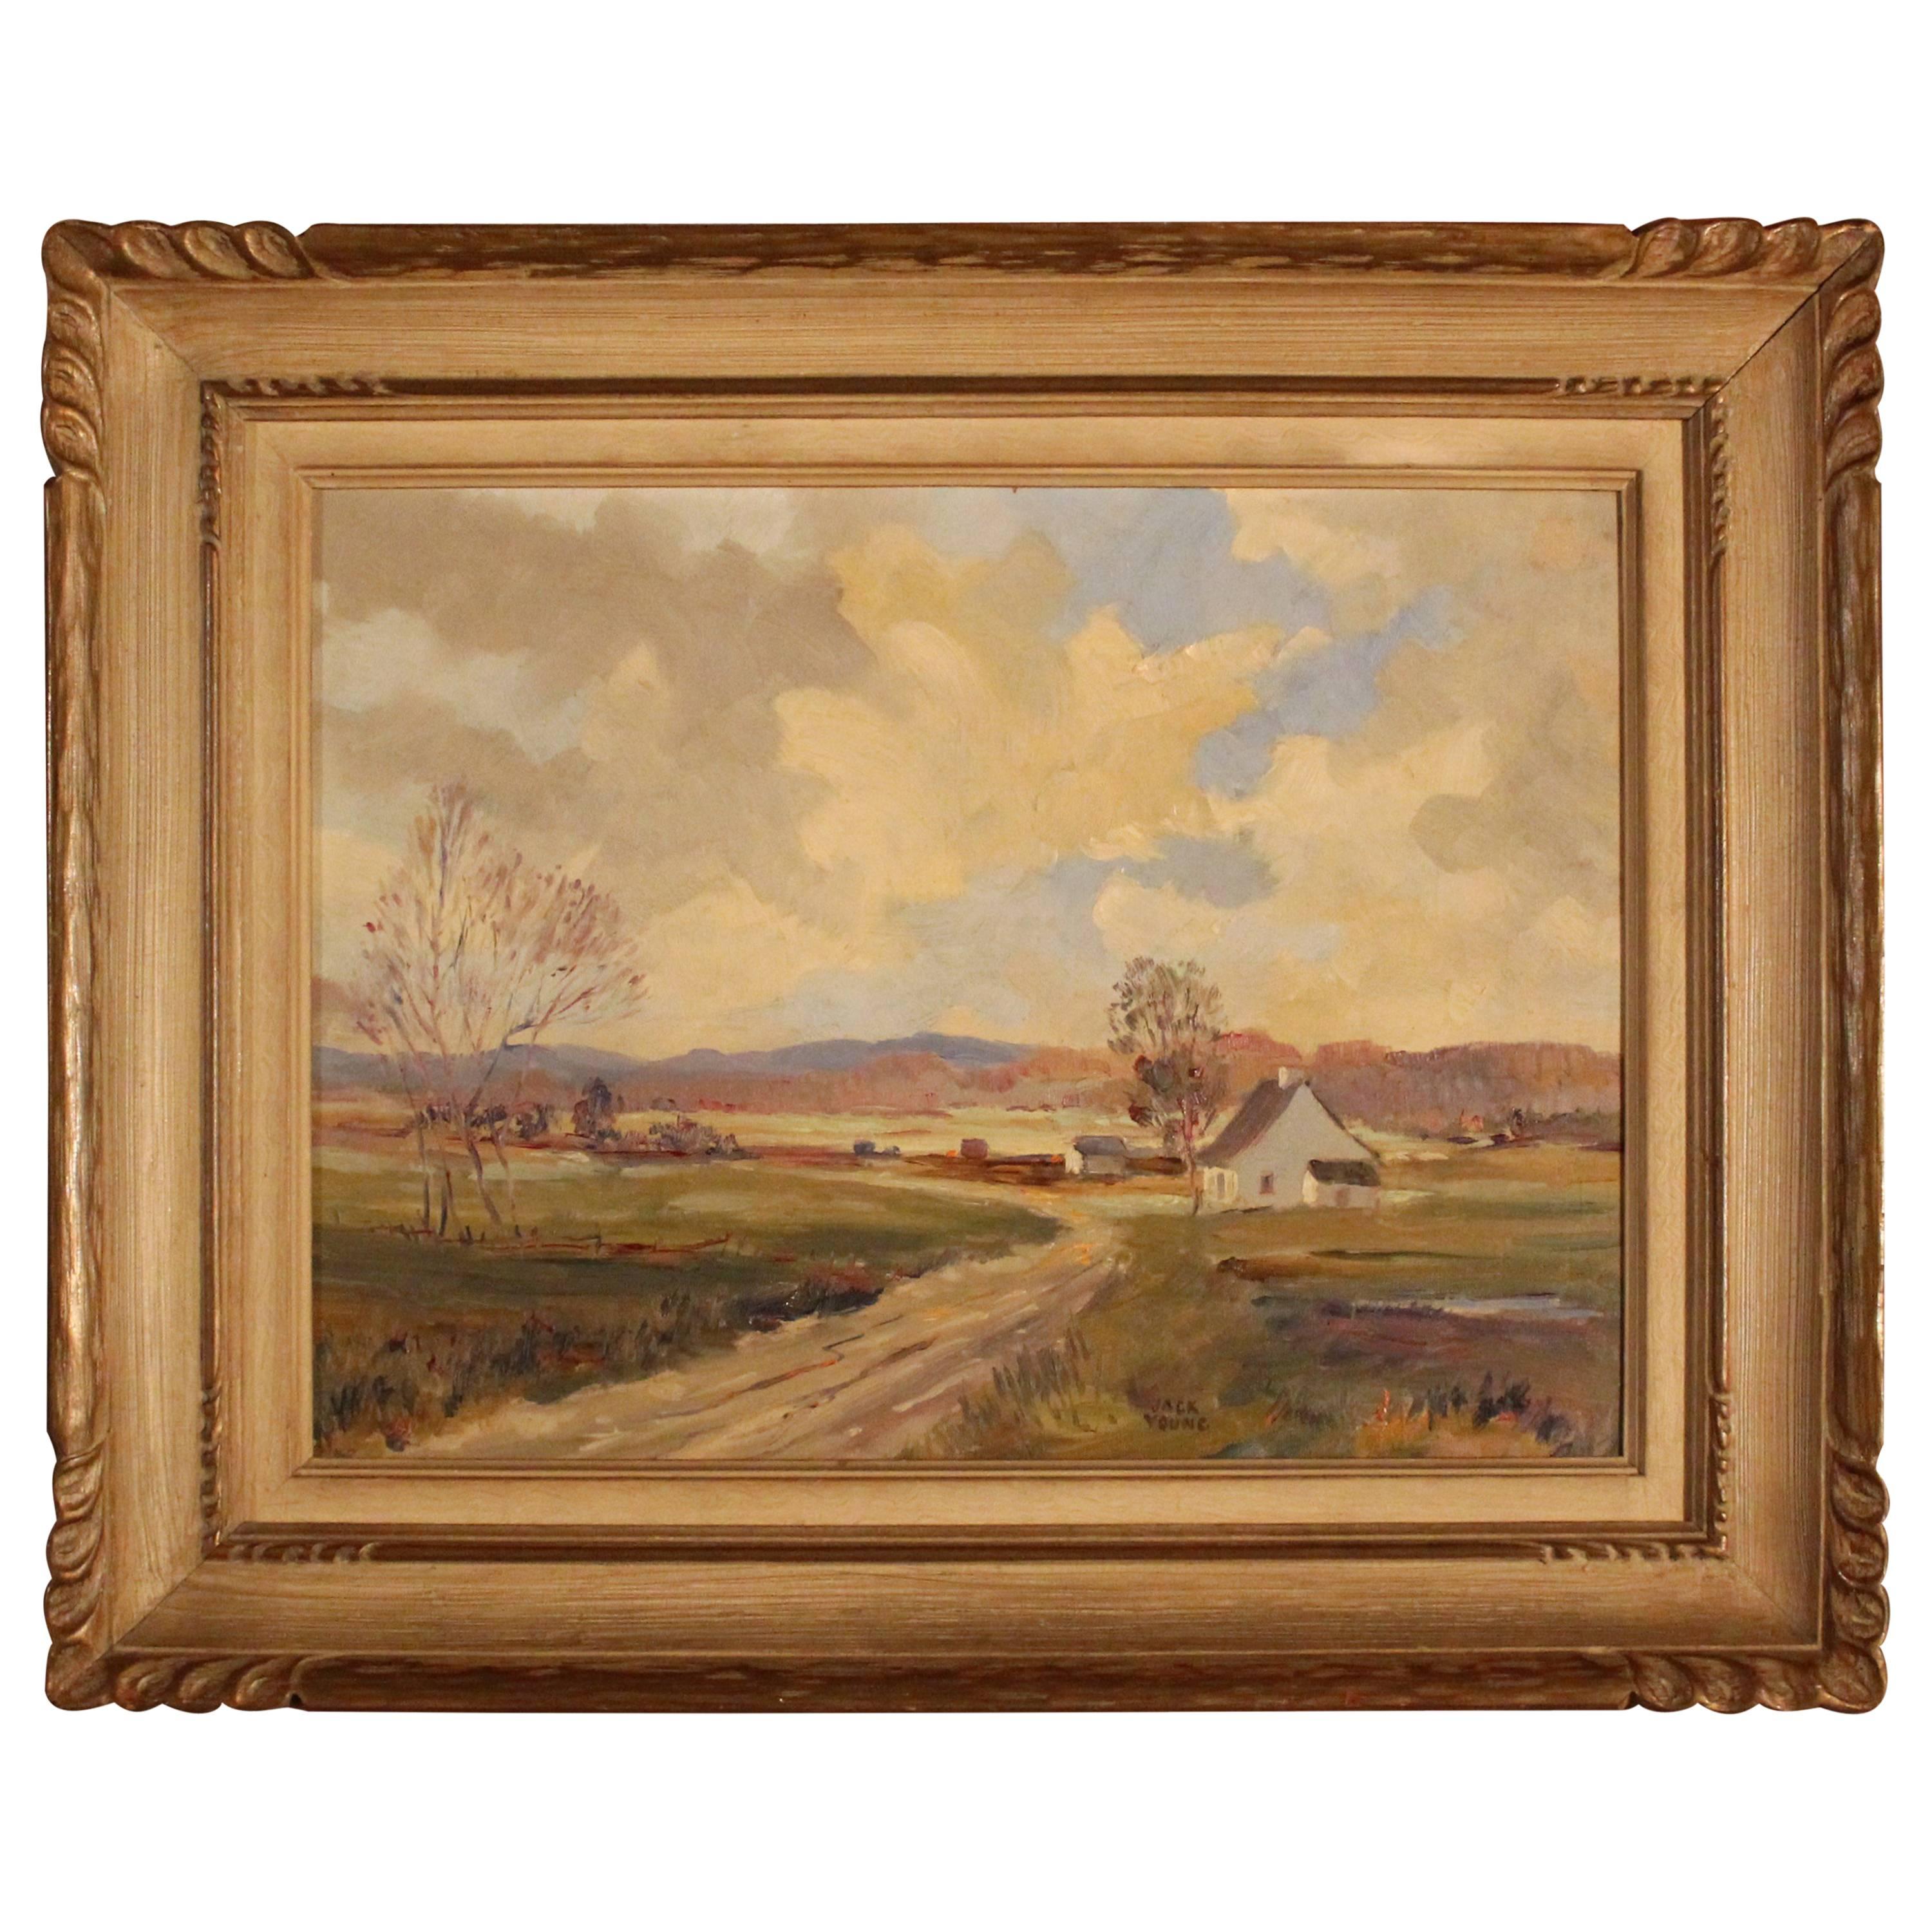 Jack Young (Canada 1894-1963) 
Size without frame: 12" high x 16" wide
Size with frame: 17.25" high x 21.25" wide.